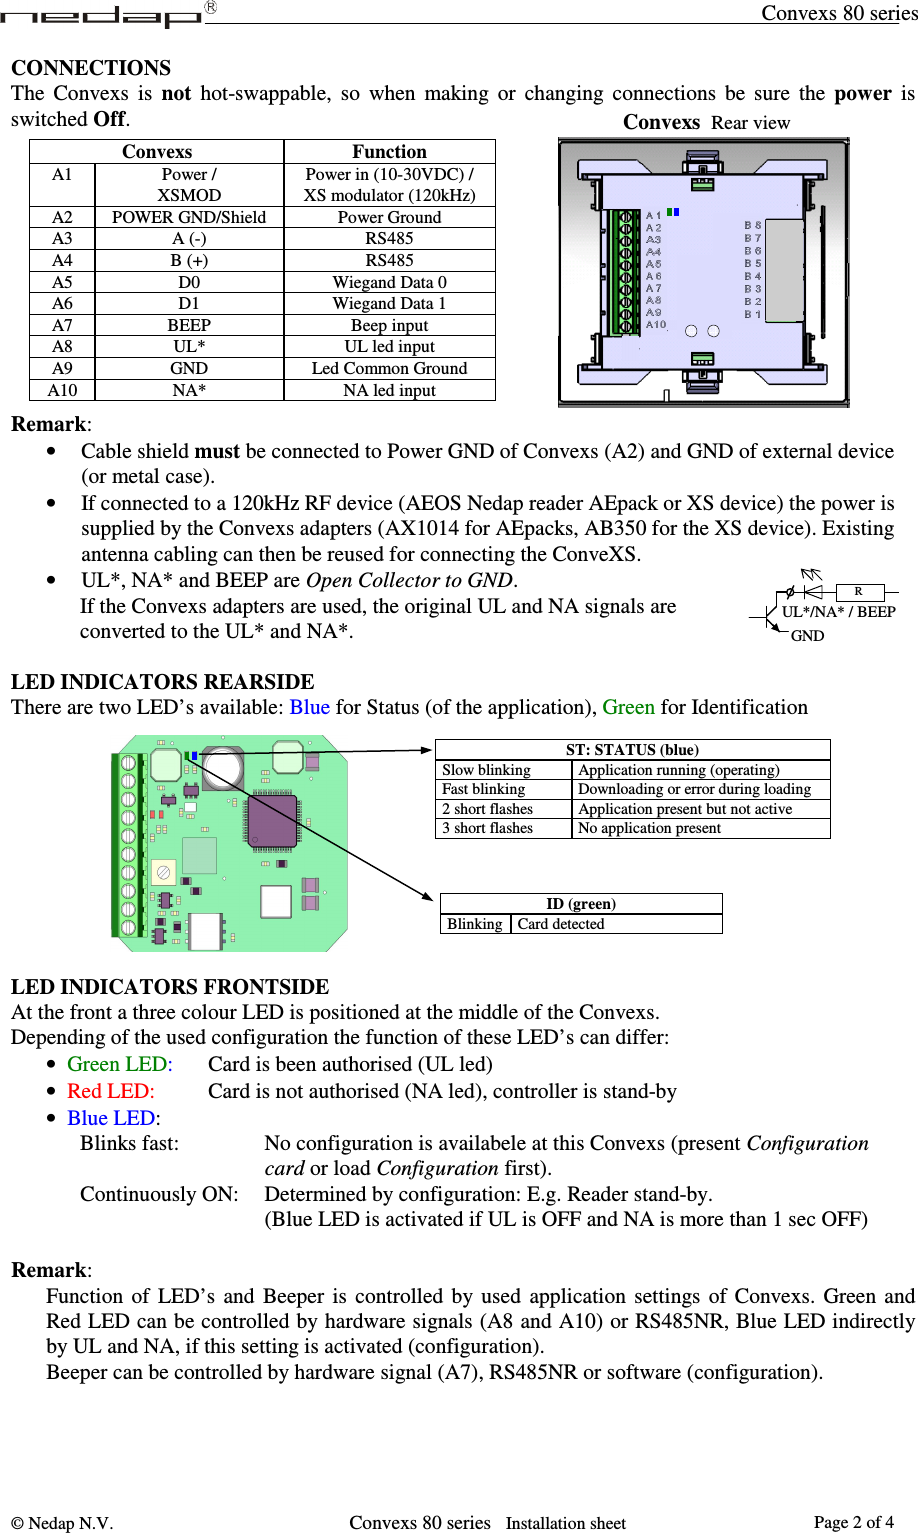 Convexs 80 series © Nedap N.V.                   Convexs 80 series   Installation sheet Page 2 of 4      R GND UL*/NA* / BEEP CONNECTIONS The  Convexs  is  not  hot-swappable,  so  when  making  or  changing  connections  be  sure  the  power  is switched Off.            Remark: • Cable shield must be connected to Power GND of Convexs (A2) and GND of external device (or metal case). • If connected to a 120kHz RF device (AEOS Nedap reader AEpack or XS device) the power is supplied by the Convexs adapters (AX1014 for AEpacks, AB350 for the XS device). Existing antenna cabling can then be reused for connecting the ConveXS. • UL*, NA* and BEEP are Open Collector to GND. If the Convexs adapters are used, the original UL and NA signals are converted to the UL* and NA*.  LED INDICATORS REARSIDE There are two LED’s available: Blue for Status (of the application), Green for Identification            LED INDICATORS FRONTSIDE At the front a three colour LED is positioned at the middle of the Convexs.  Depending of the used configuration the function of these LED’s can differ: • Green LED:    Card is been authorised (UL led)  • Red LED:     Card is not authorised (NA led), controller is stand-by • Blue LED: Blinks fast:       No configuration is availabele at this Convexs (present Configuration  card or load Configuration first). Continuously ON:  Determined by configuration: E.g. Reader stand-by. (Blue LED is activated if UL is OFF and NA is more than 1 sec OFF)  Remark: Function  of  LED’s  and  Beeper  is  controlled  by  used  application  settings  of  Convexs.  Green and Red LED can be controlled by hardware signals (A8 and A10) or RS485NR, Blue LED indirectly by UL and NA, if this setting is activated (configuration). Beeper can be controlled by hardware signal (A7), RS485NR or software (configuration).  ID (green) Blinking Card detected  ST: STATUS (blue) Slow blinking   Application running (operating) Fast blinking  Downloading or error during loading 2 short flashes  Application present but not active 3 short flashes  No application present  Convexs  Function A1  Power / XSMOD Power in (10-30VDC) / XS modulator (120kHz) A2  POWER GND/Shield  Power Ground A3  A (-)  RS485 A4  B (+)  RS485 A5  D0  Wiegand Data 0 A6  D1  Wiegand Data 1 A7 BEEP Beep input A8  UL*  UL led input A9 GND Led Common Ground A10  NA*  NA led input Convexs  Rear view 